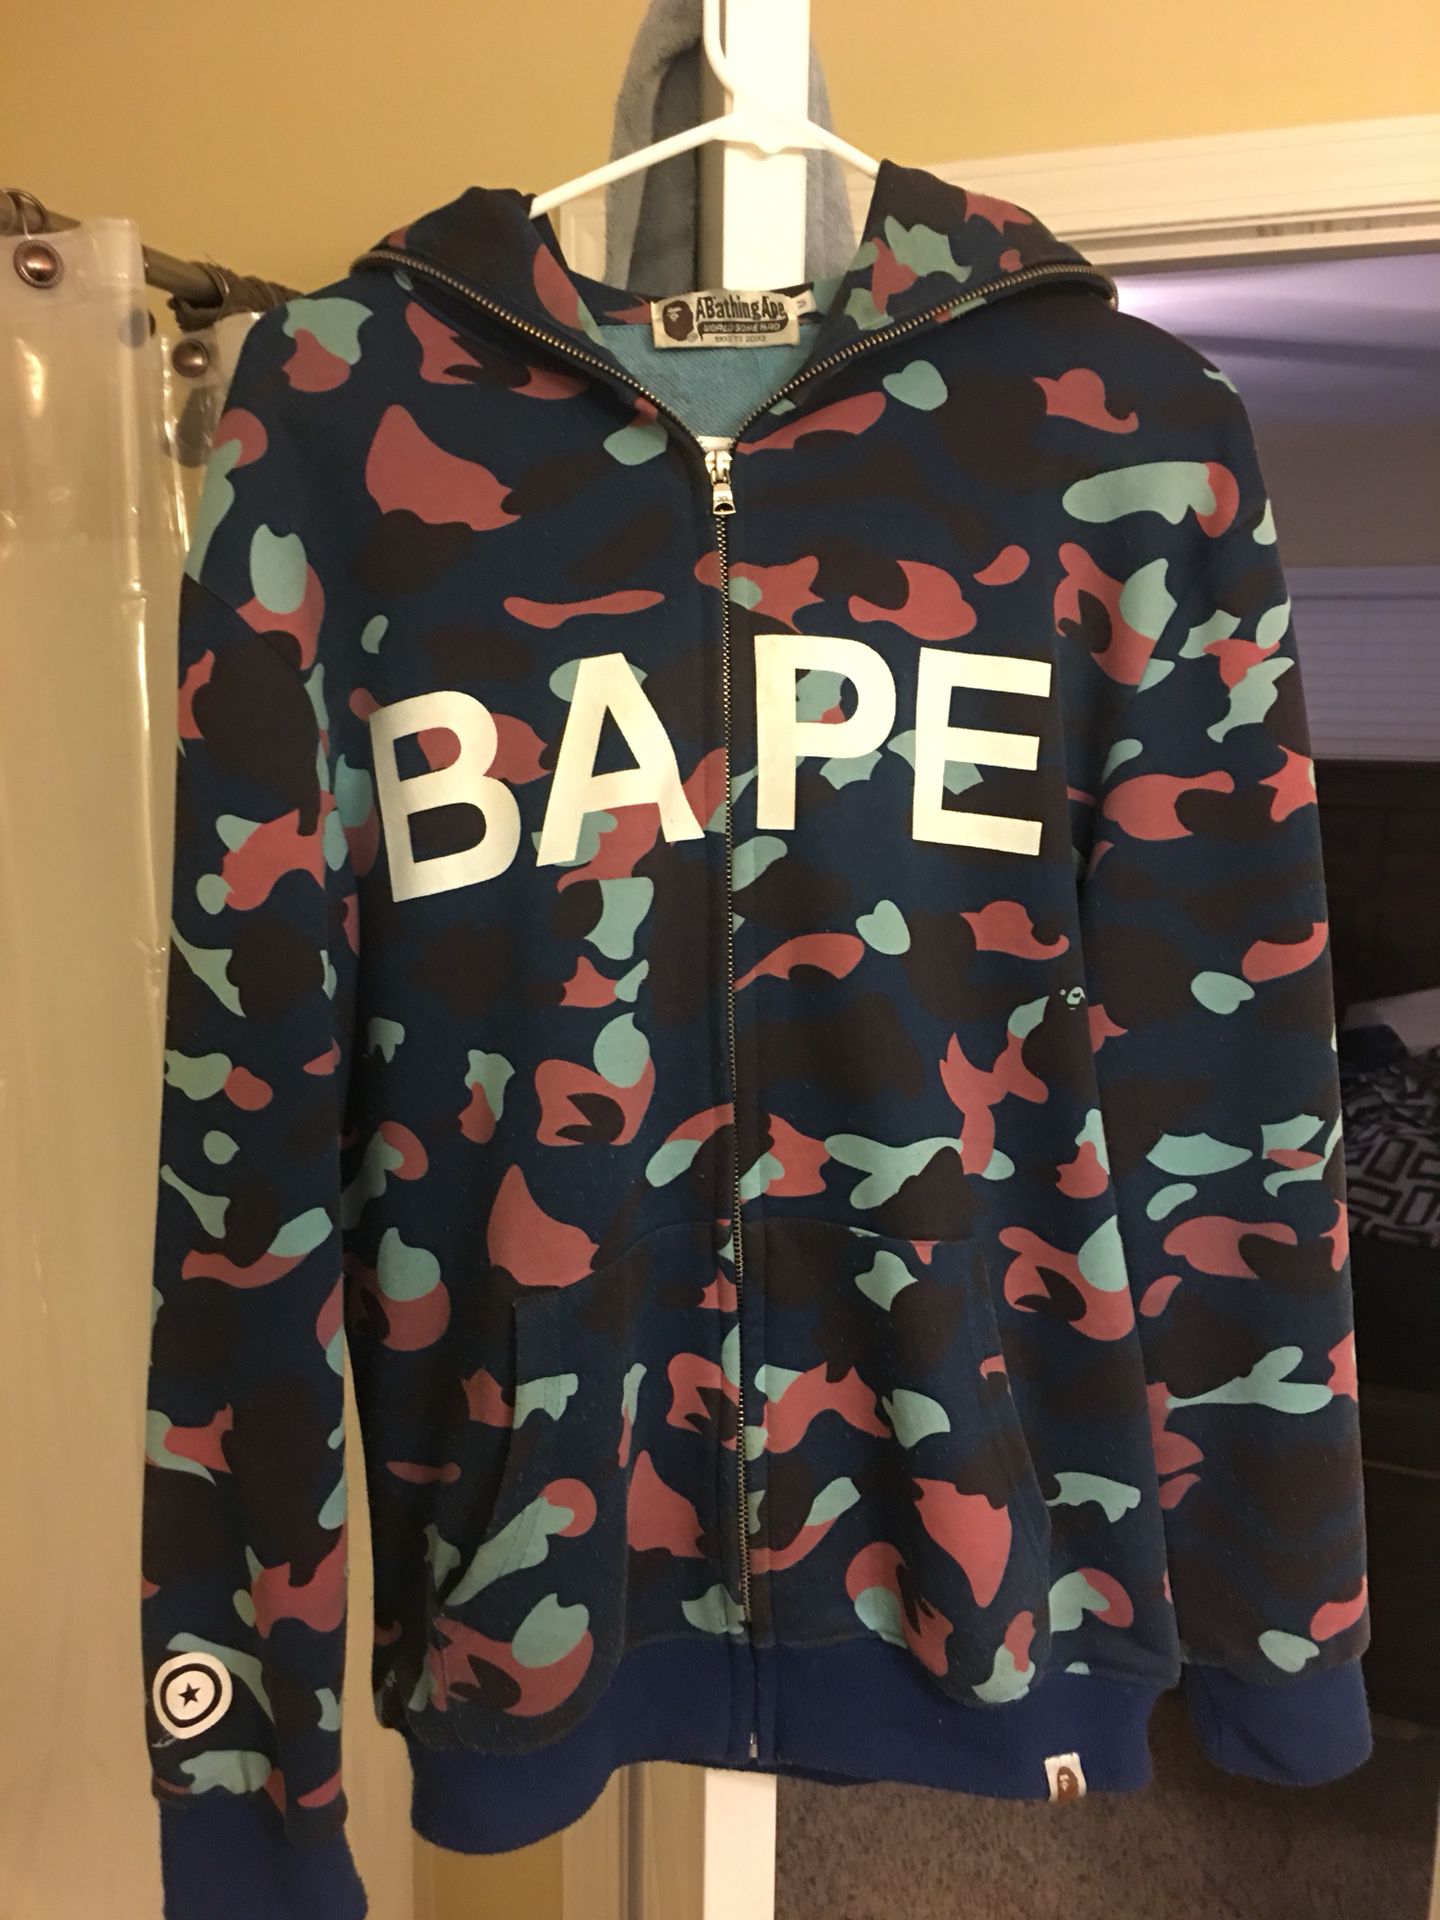 Bape Jacket Authentic [WILL TRADE FOR A IPHONE]